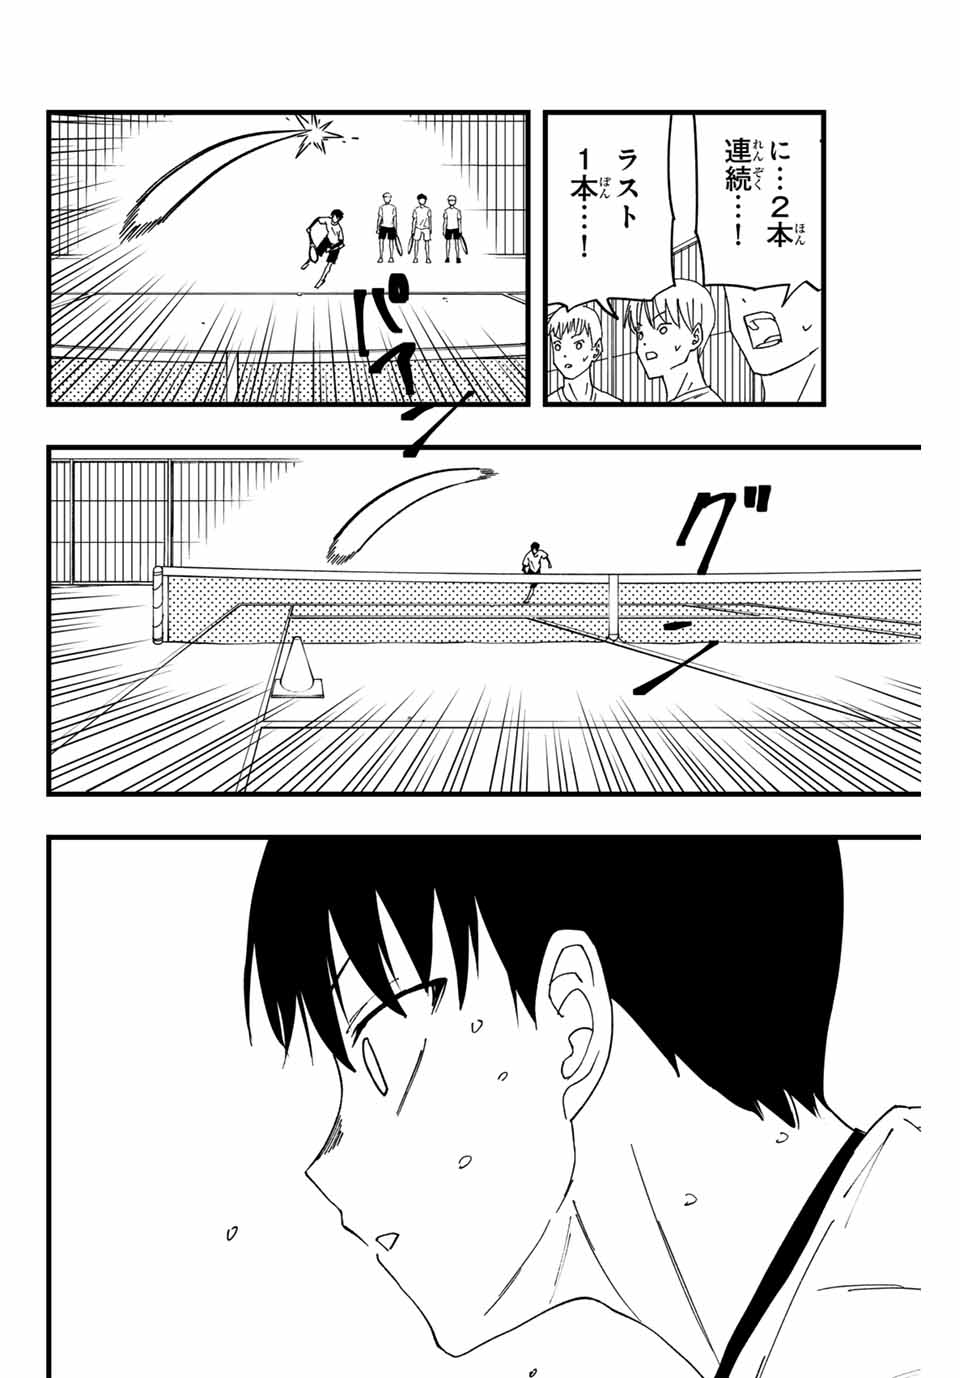 LoVE GAME 第2話 - Page 34